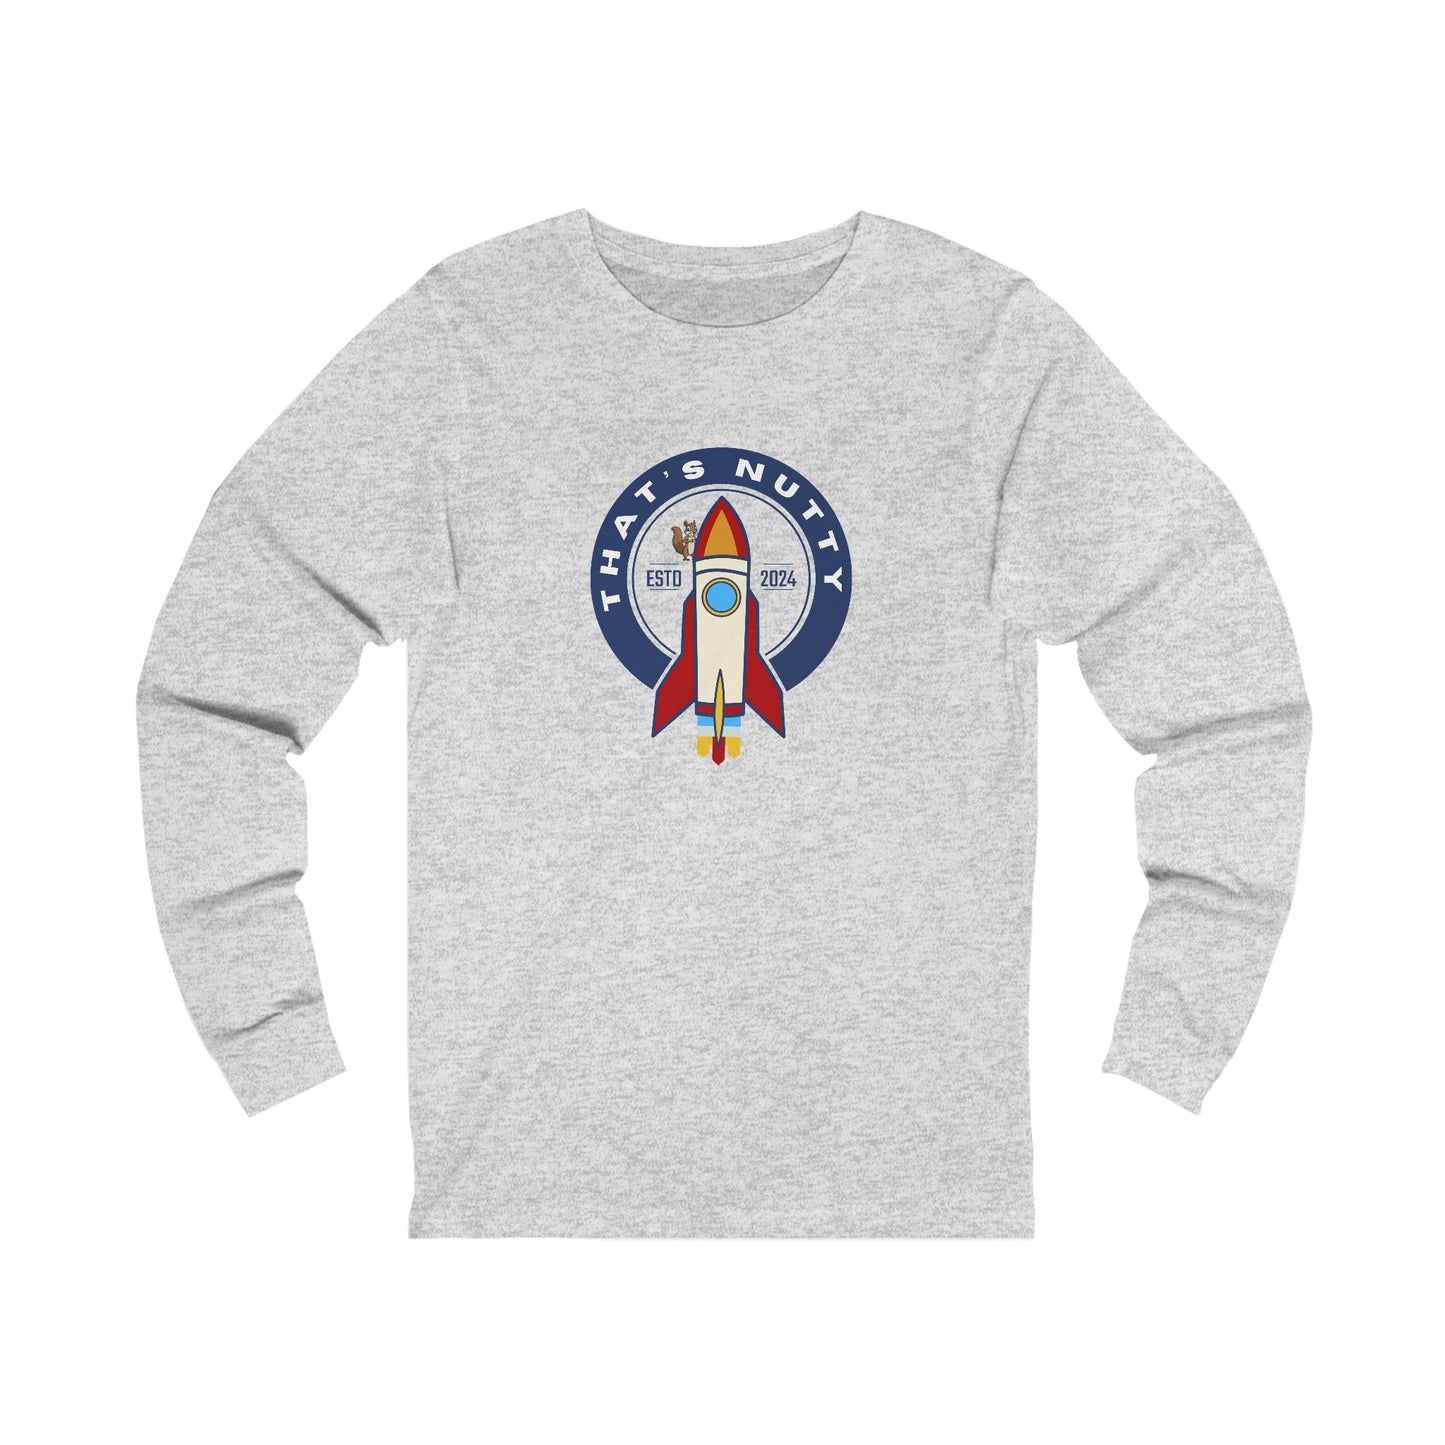 That's Nutty On A Rocket Ship. Unisex Jersey Long Sleeve Tee